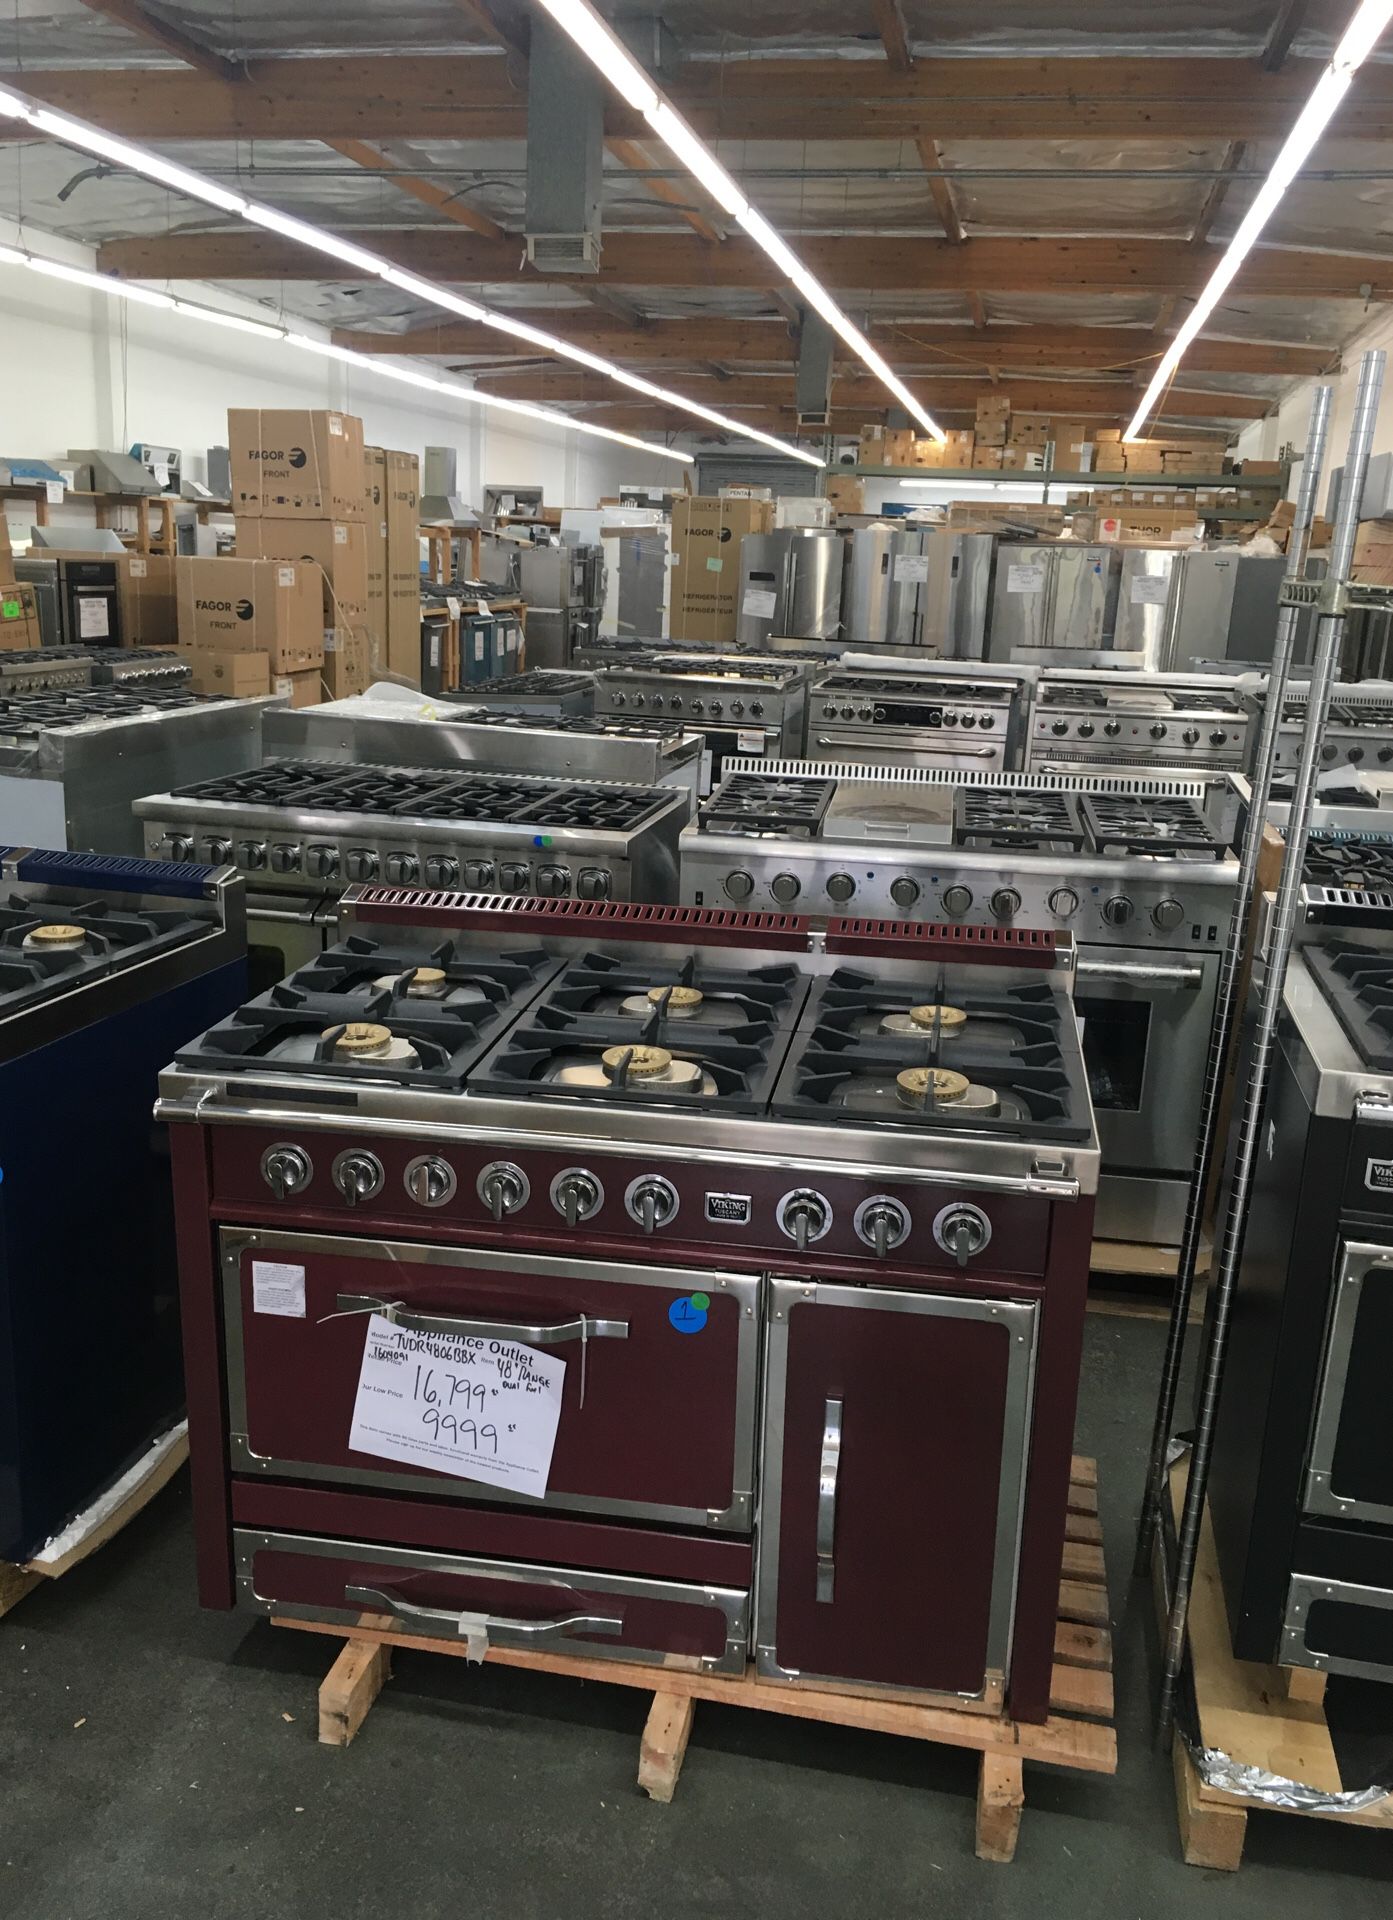 Warehouse full of high end discounted appliances